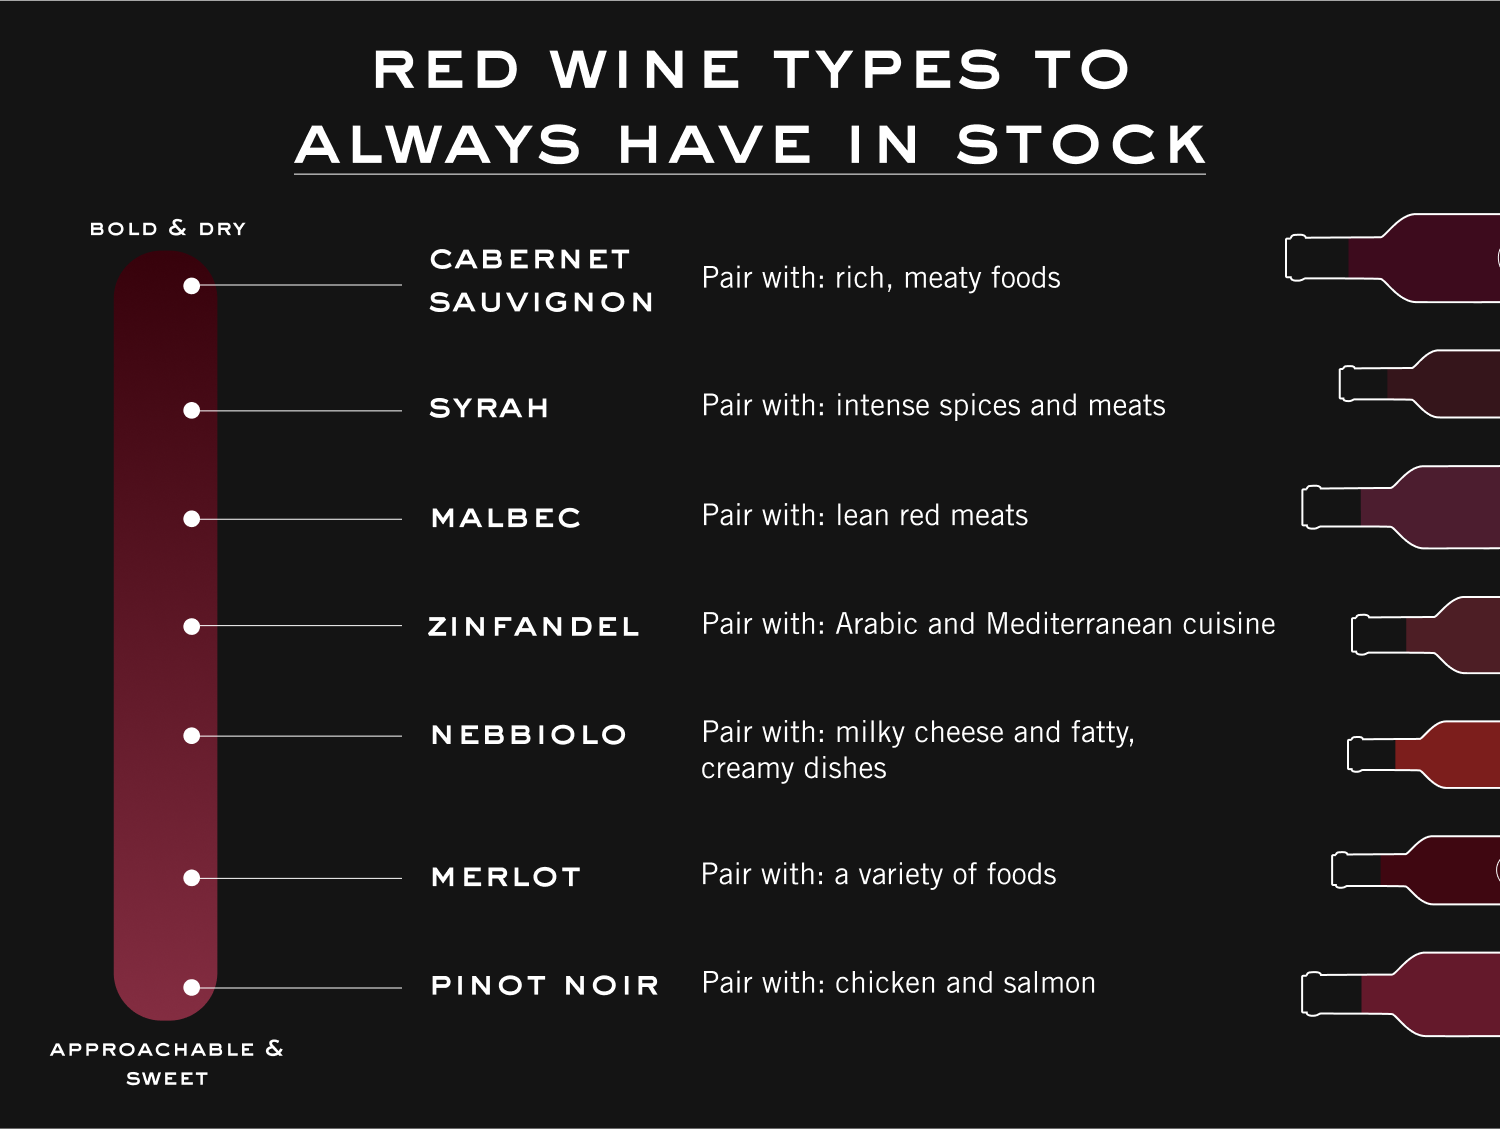 Red wine types to always have in stock